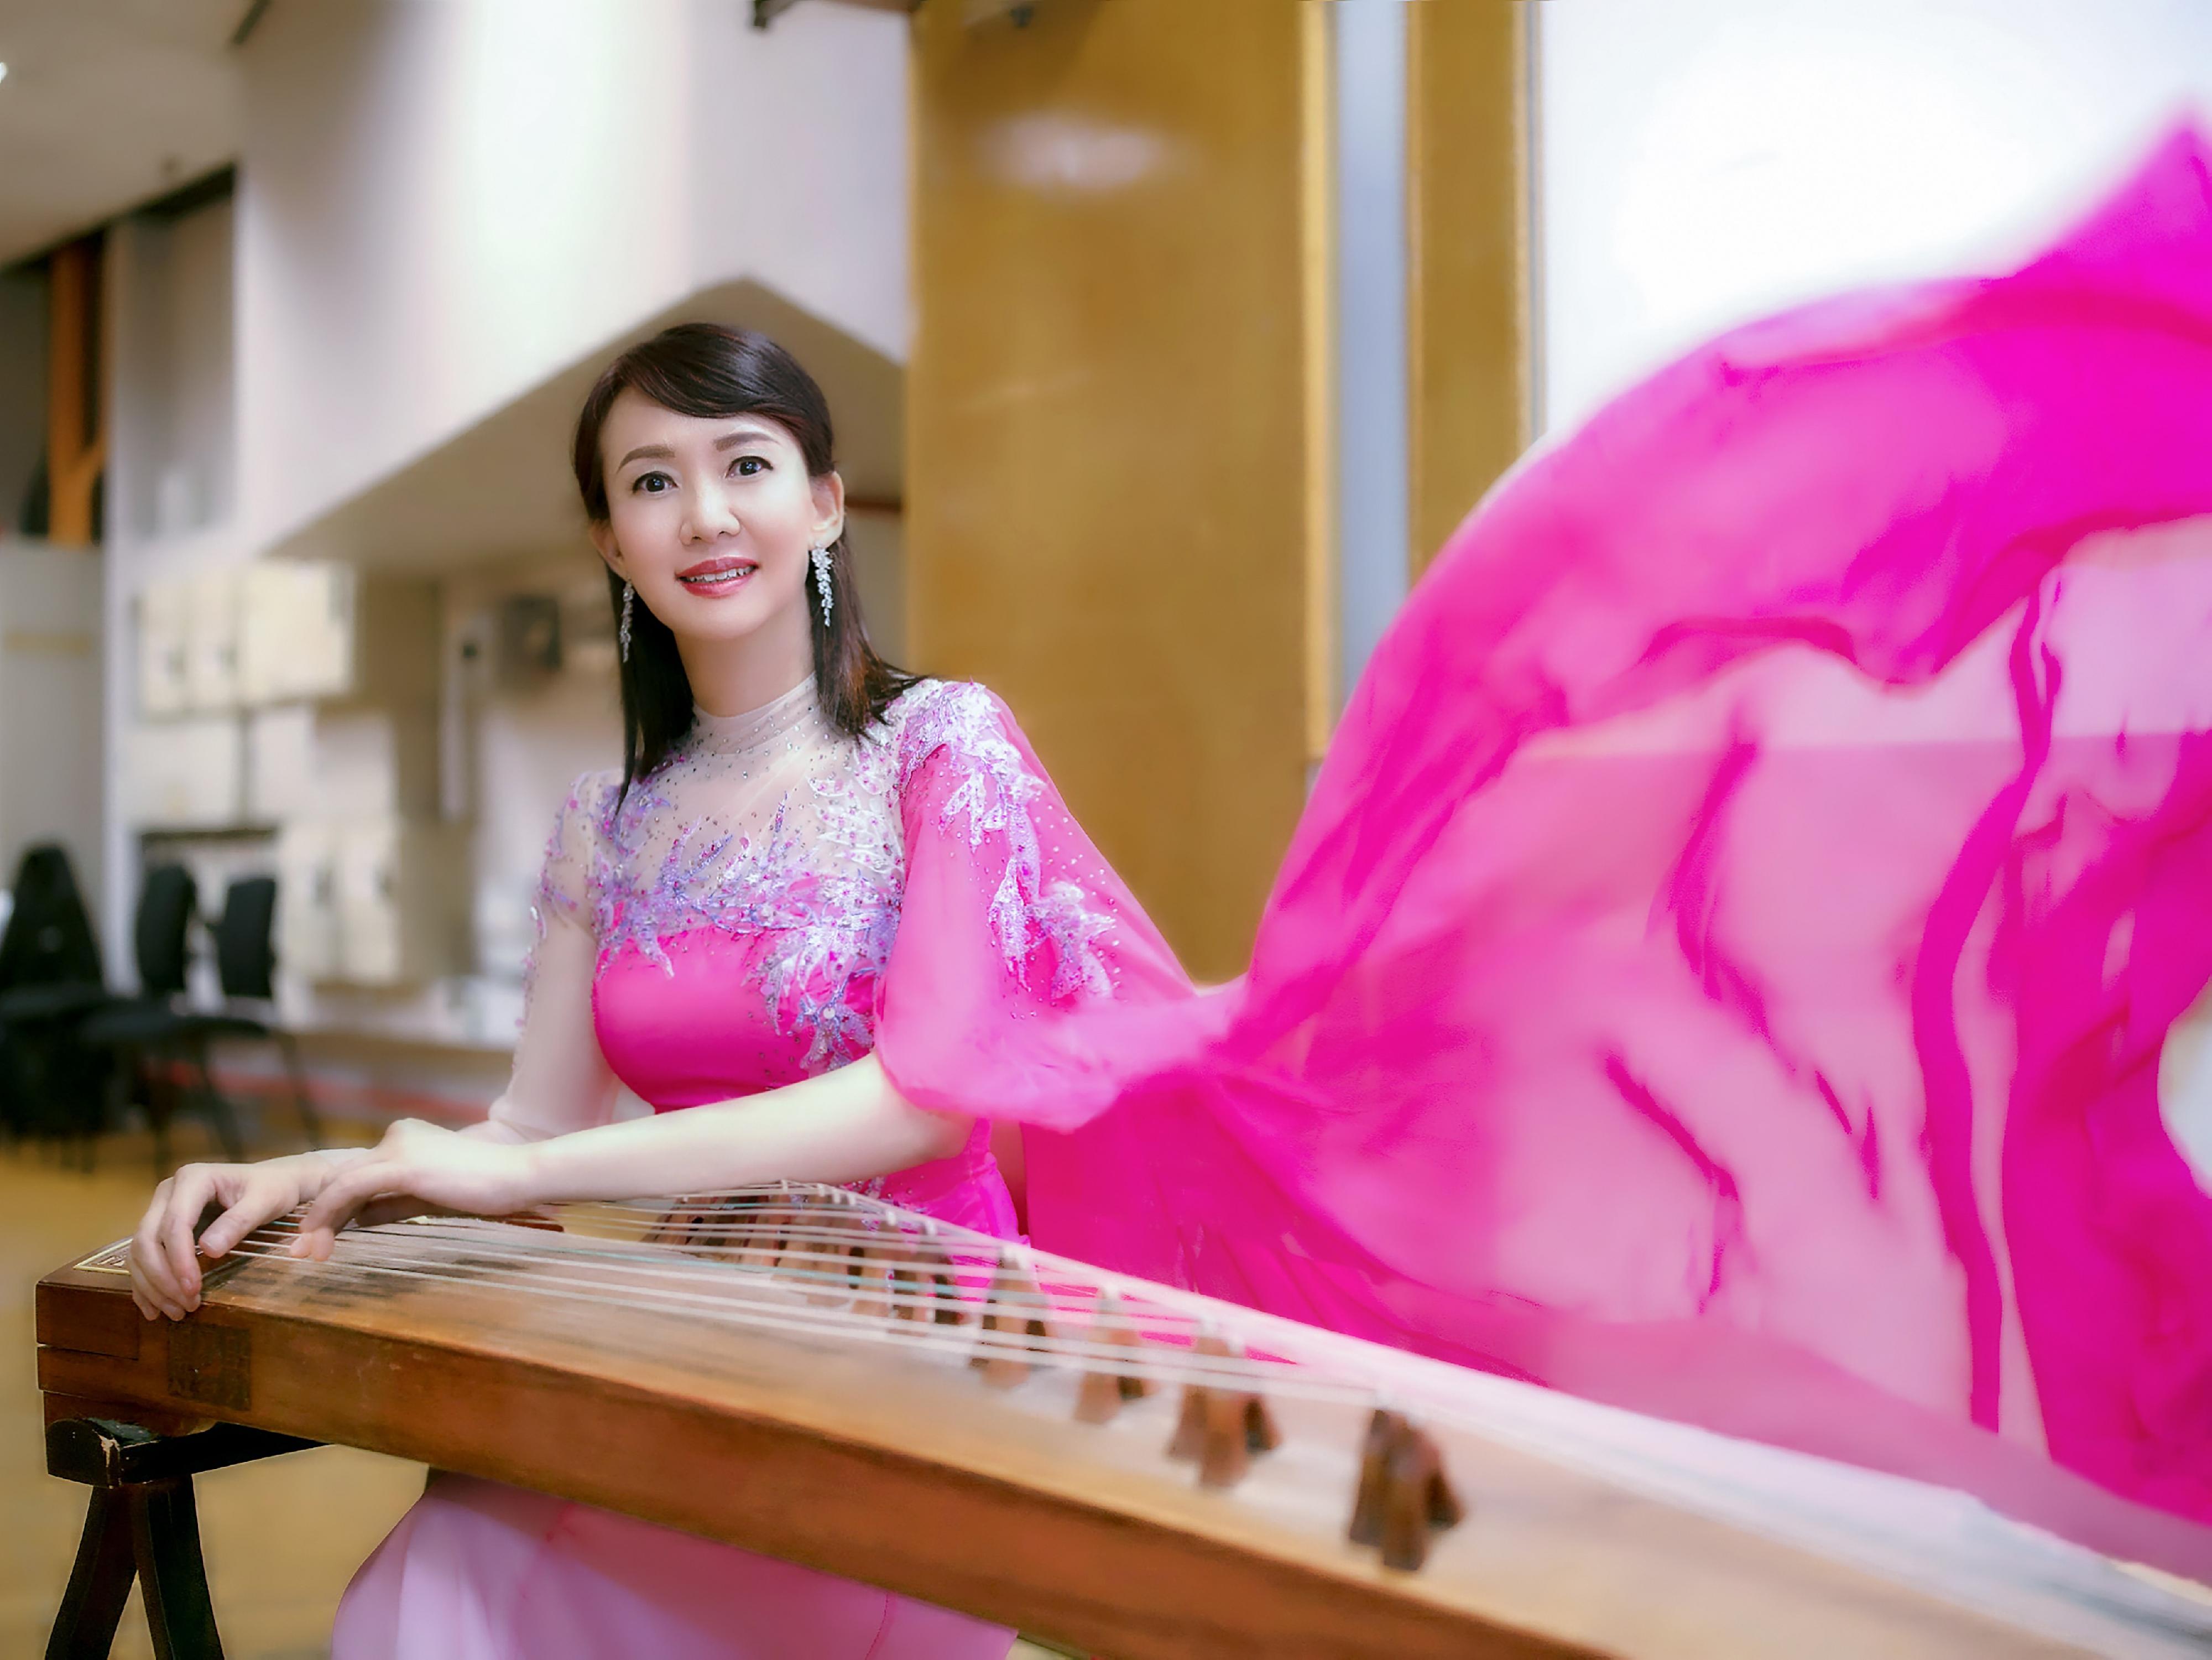 The Leisure and Cultural Services Department will present a number of recitals under the "Our Music Talents" Series and the "City Hall Virtuosi" Series from late September to January next year. Photo shows guzheng virtuoso Ng hiu-hung.